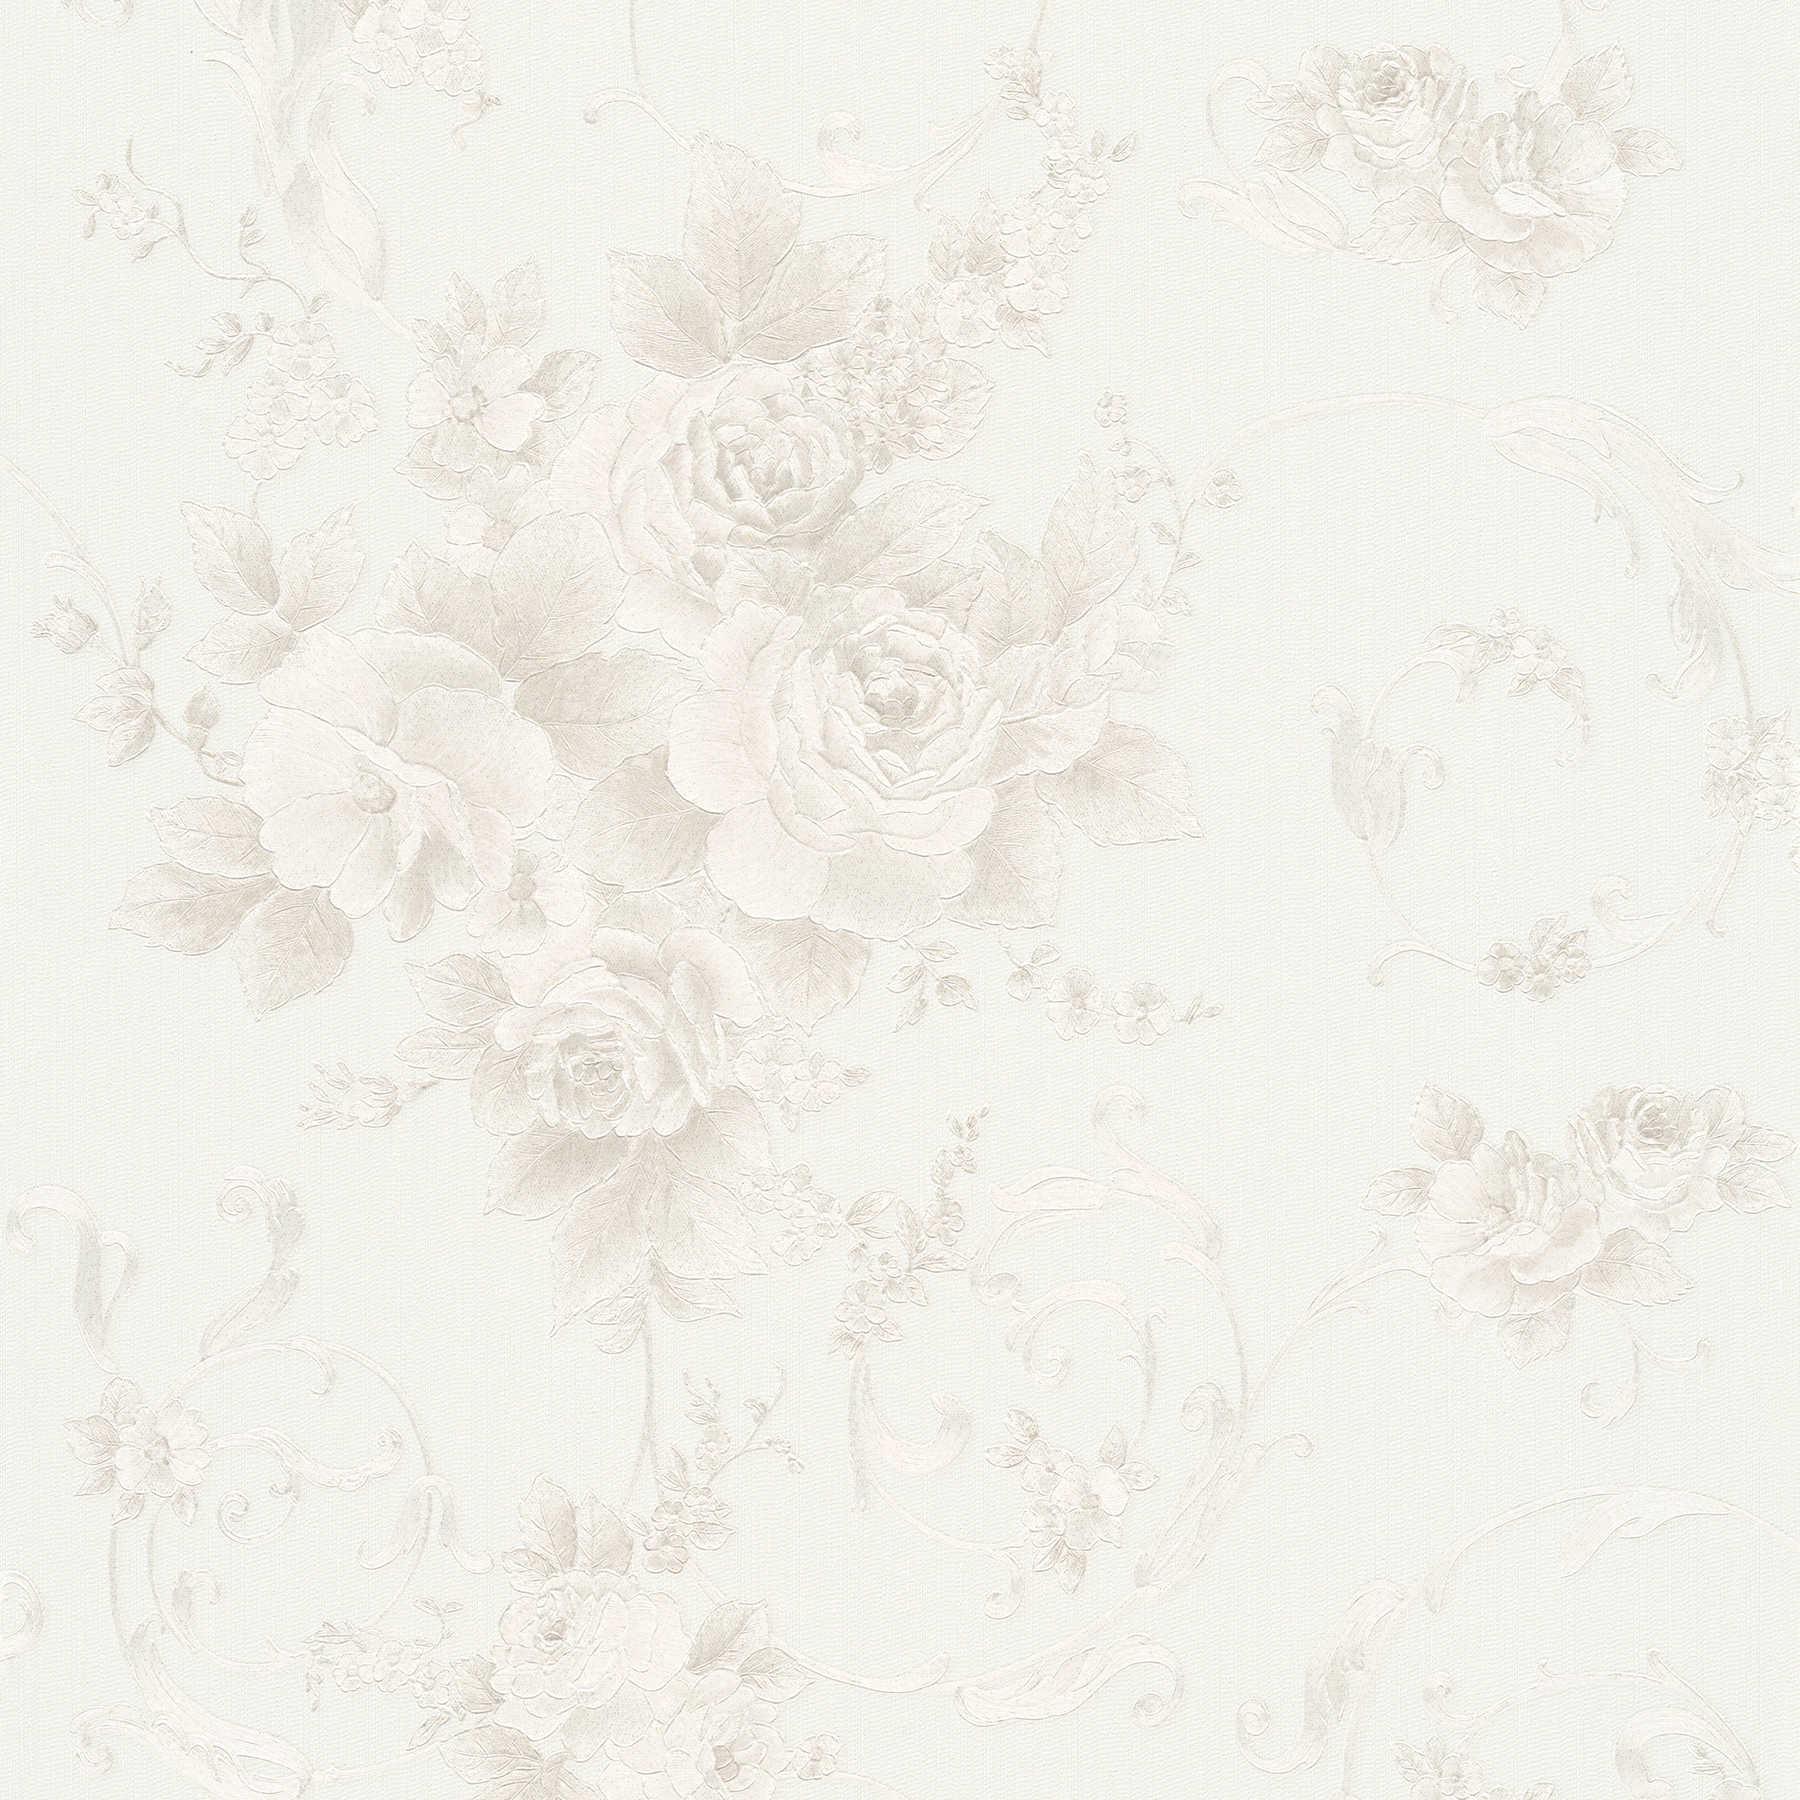         Rose petal wallpaper with metallic effect in country style - grey, bronze, white
    